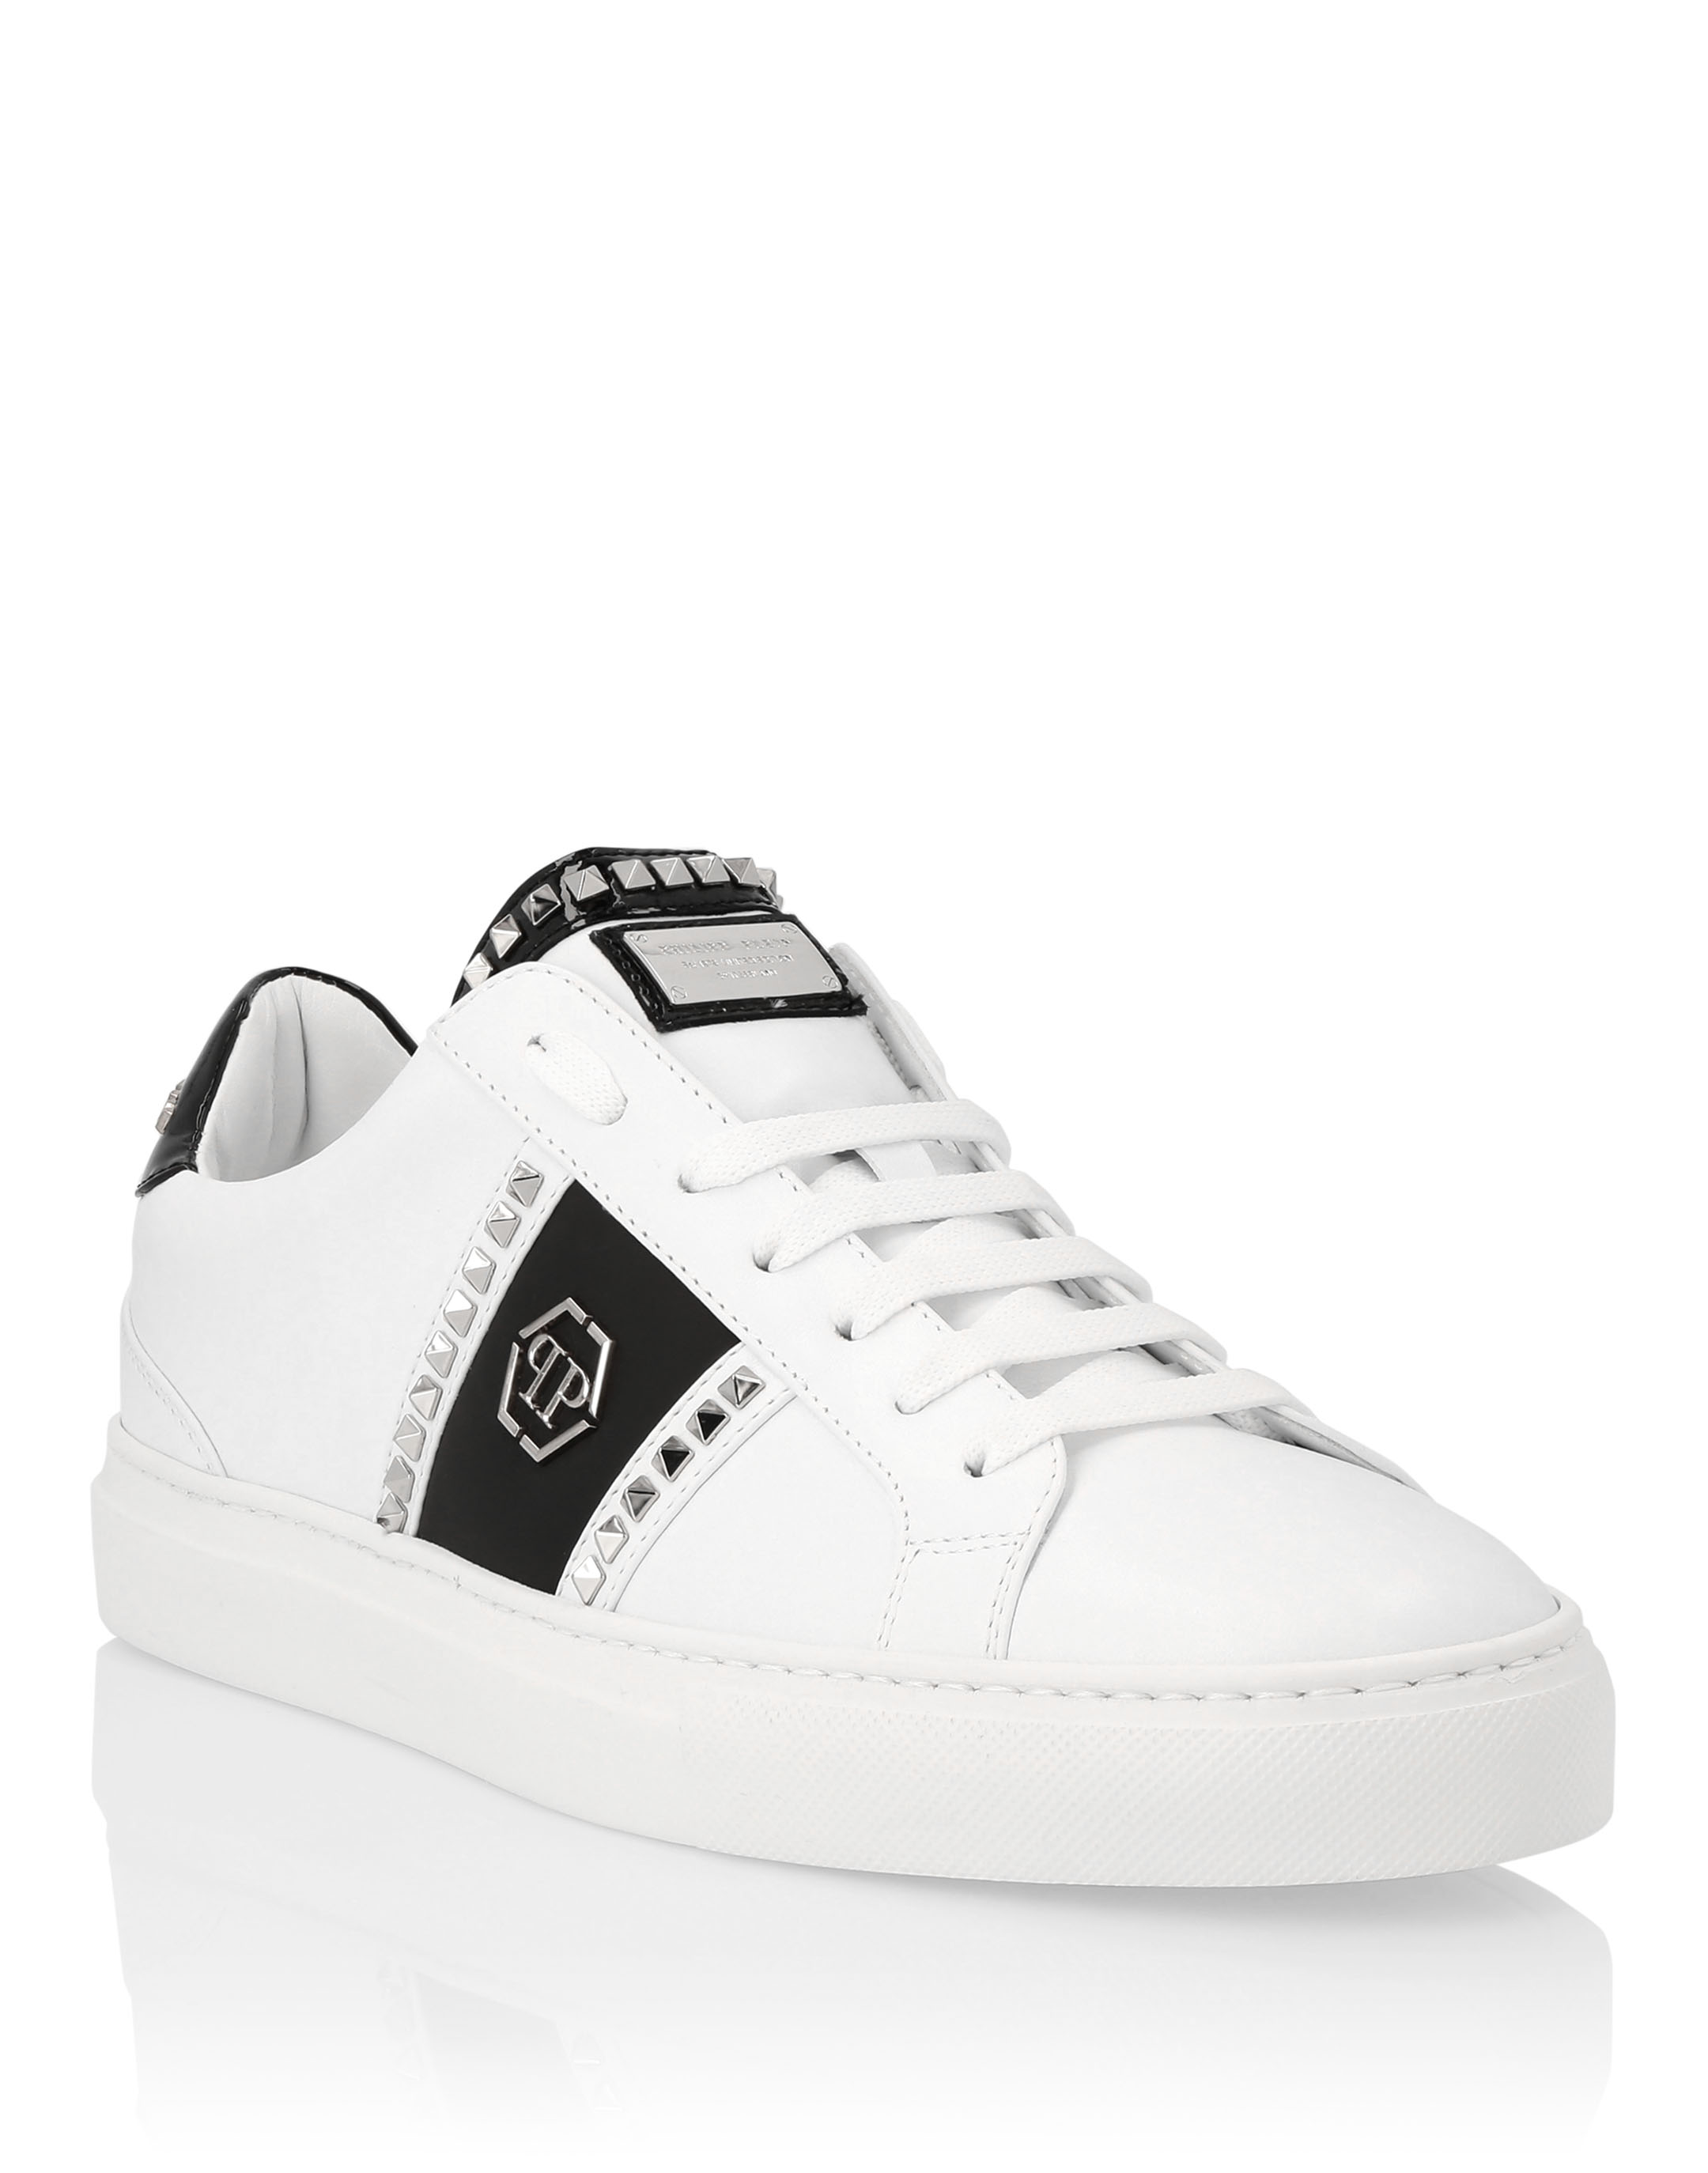 Lo-Top Sneakers Studs | Philipp Plein Outlet